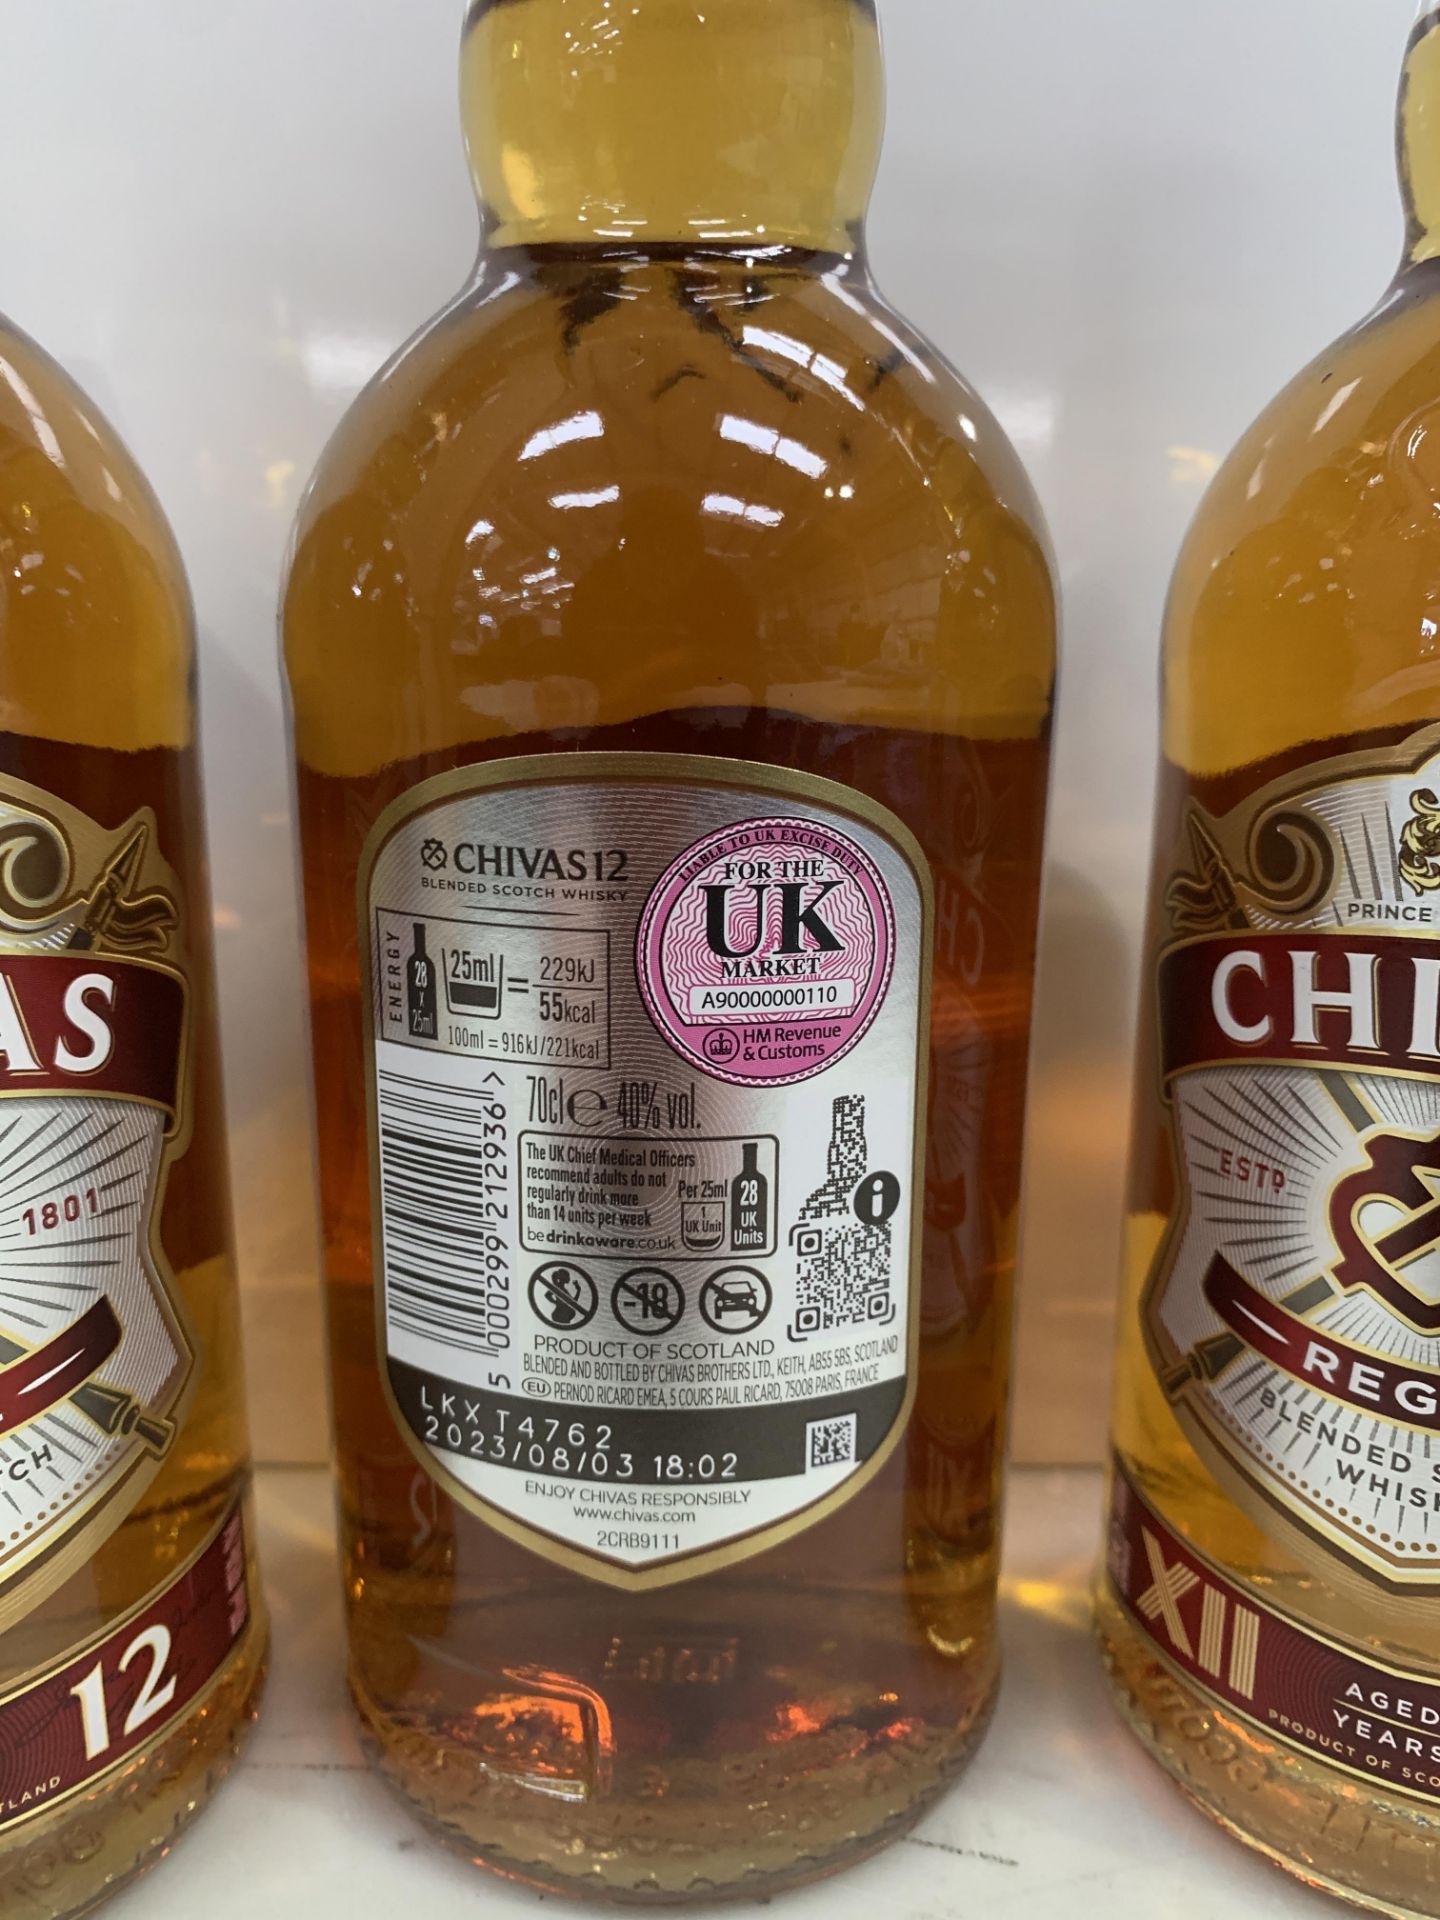 3 x Bottles of Chivas Regal 12 Year Aged Blended Scotch Whisky 70cl 40% - Image 3 of 3